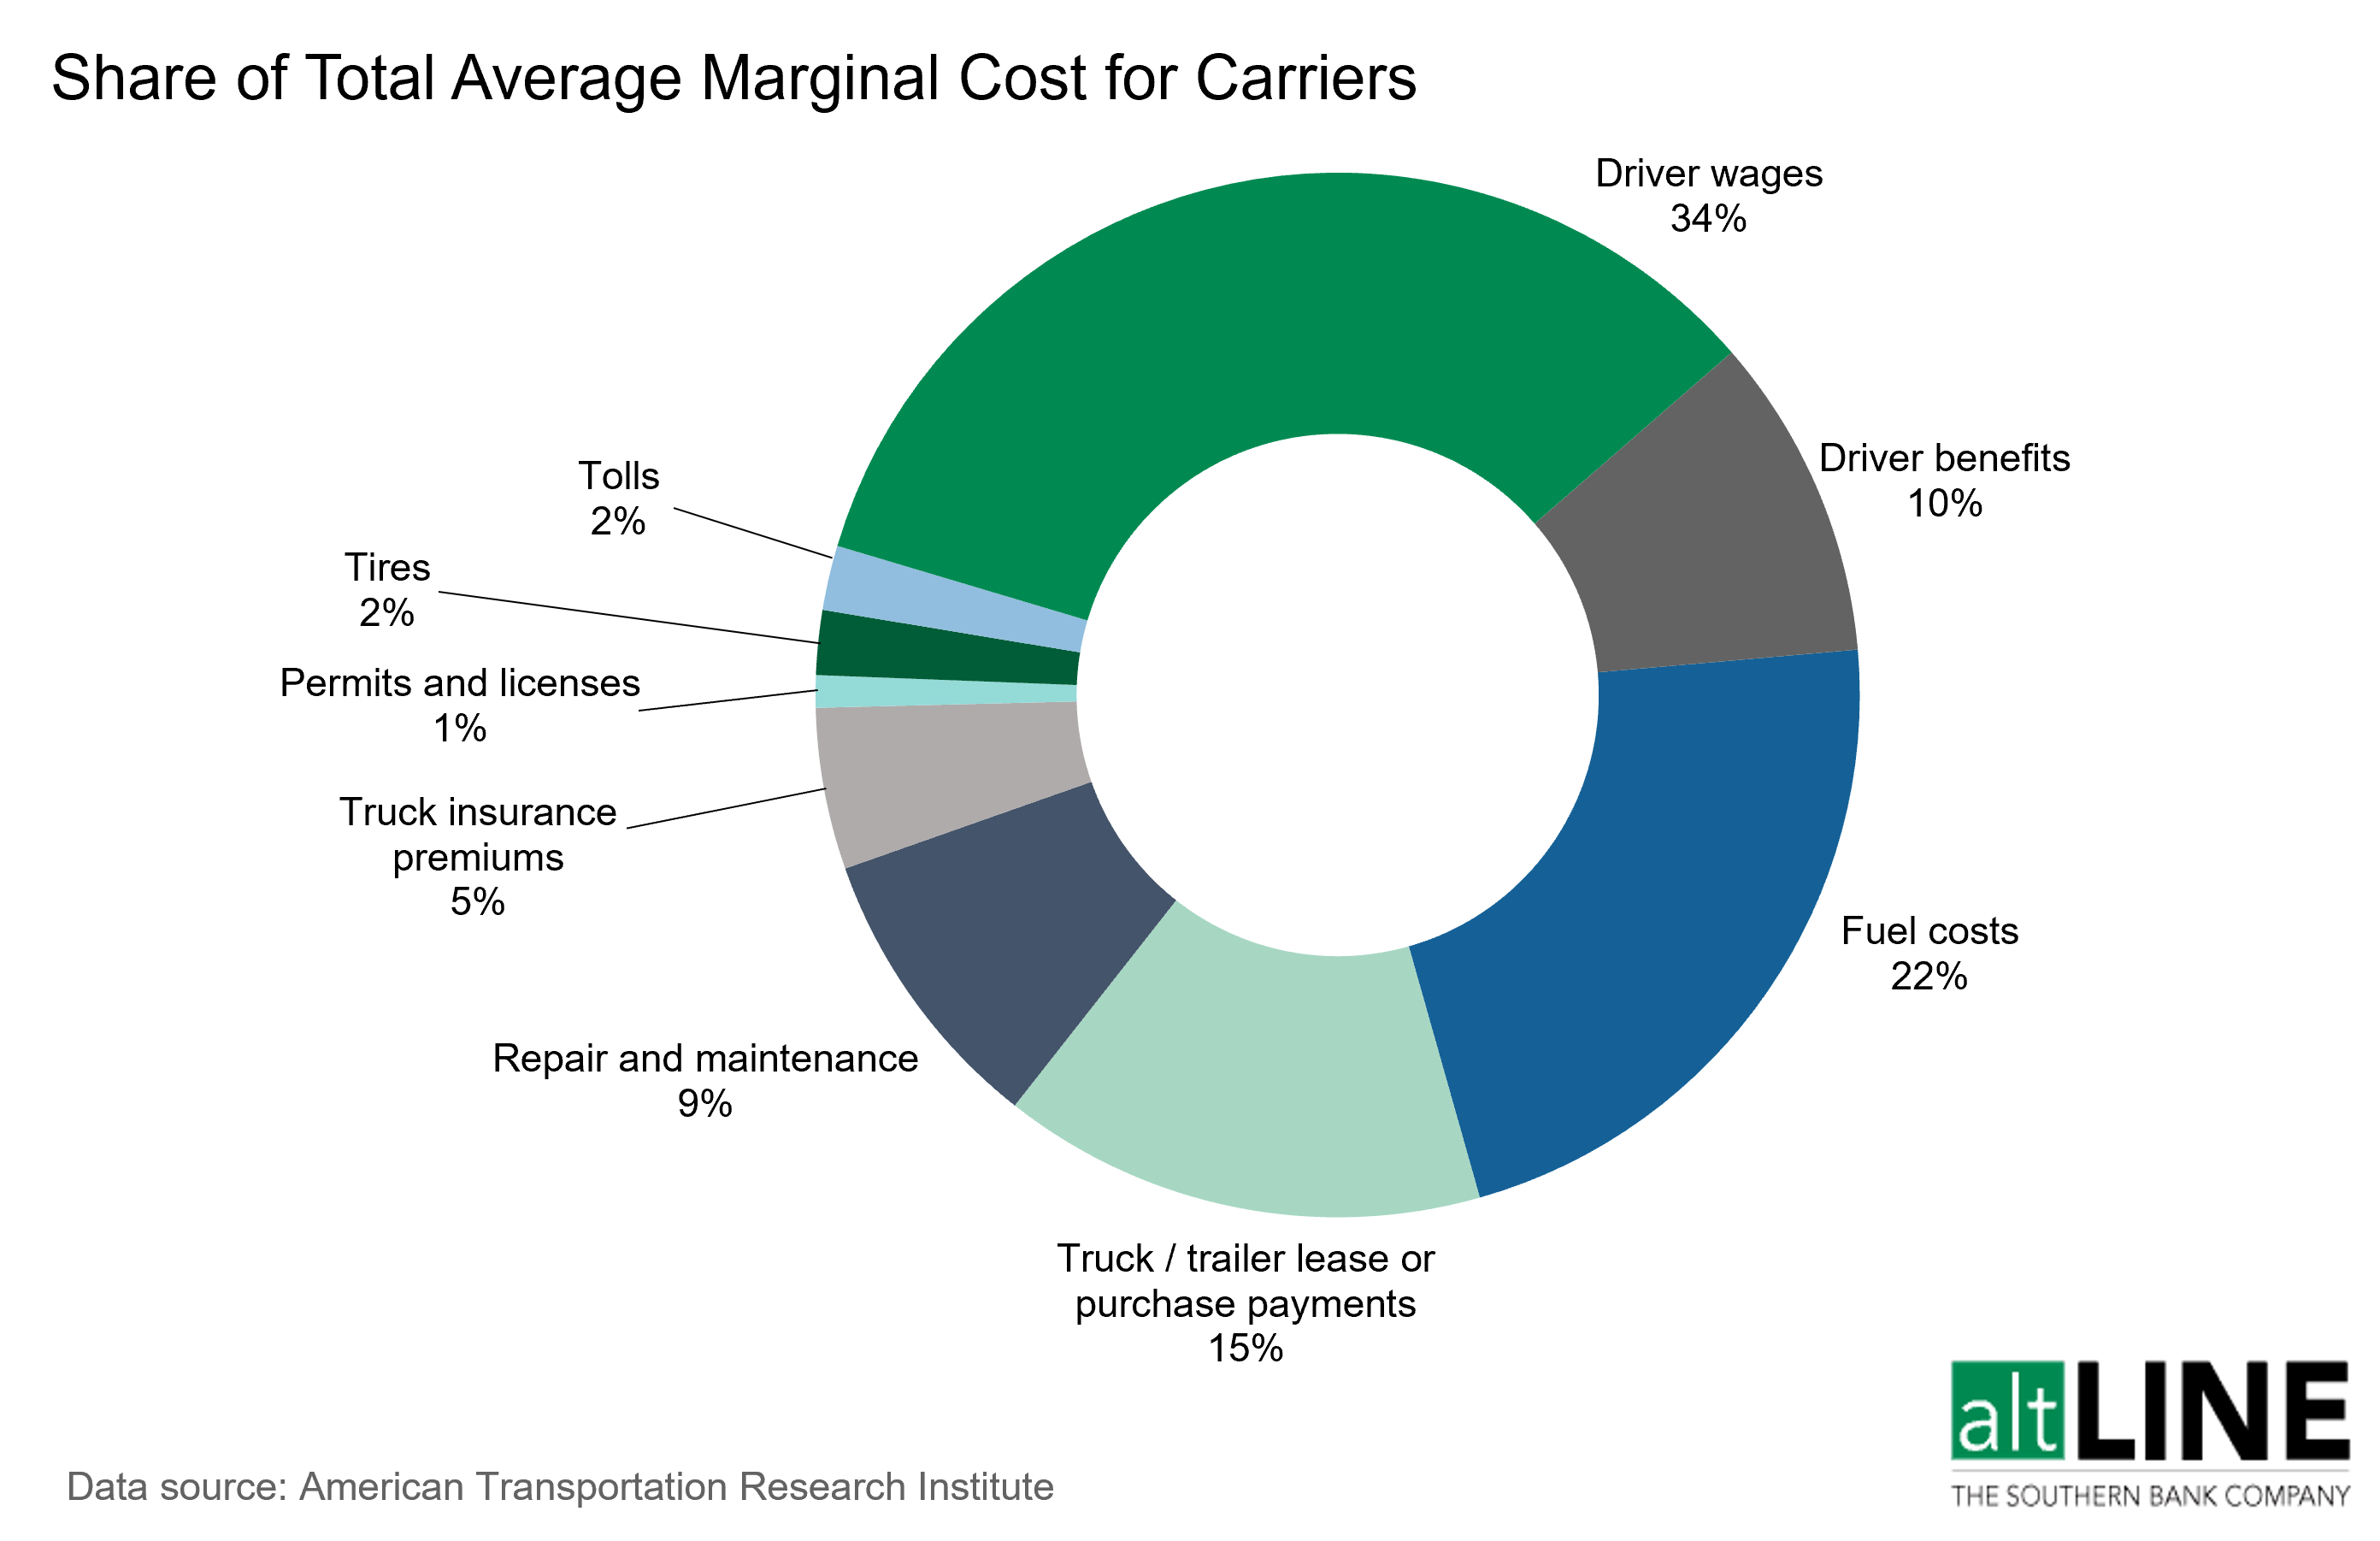 chart showing the average marginal cost for carriers